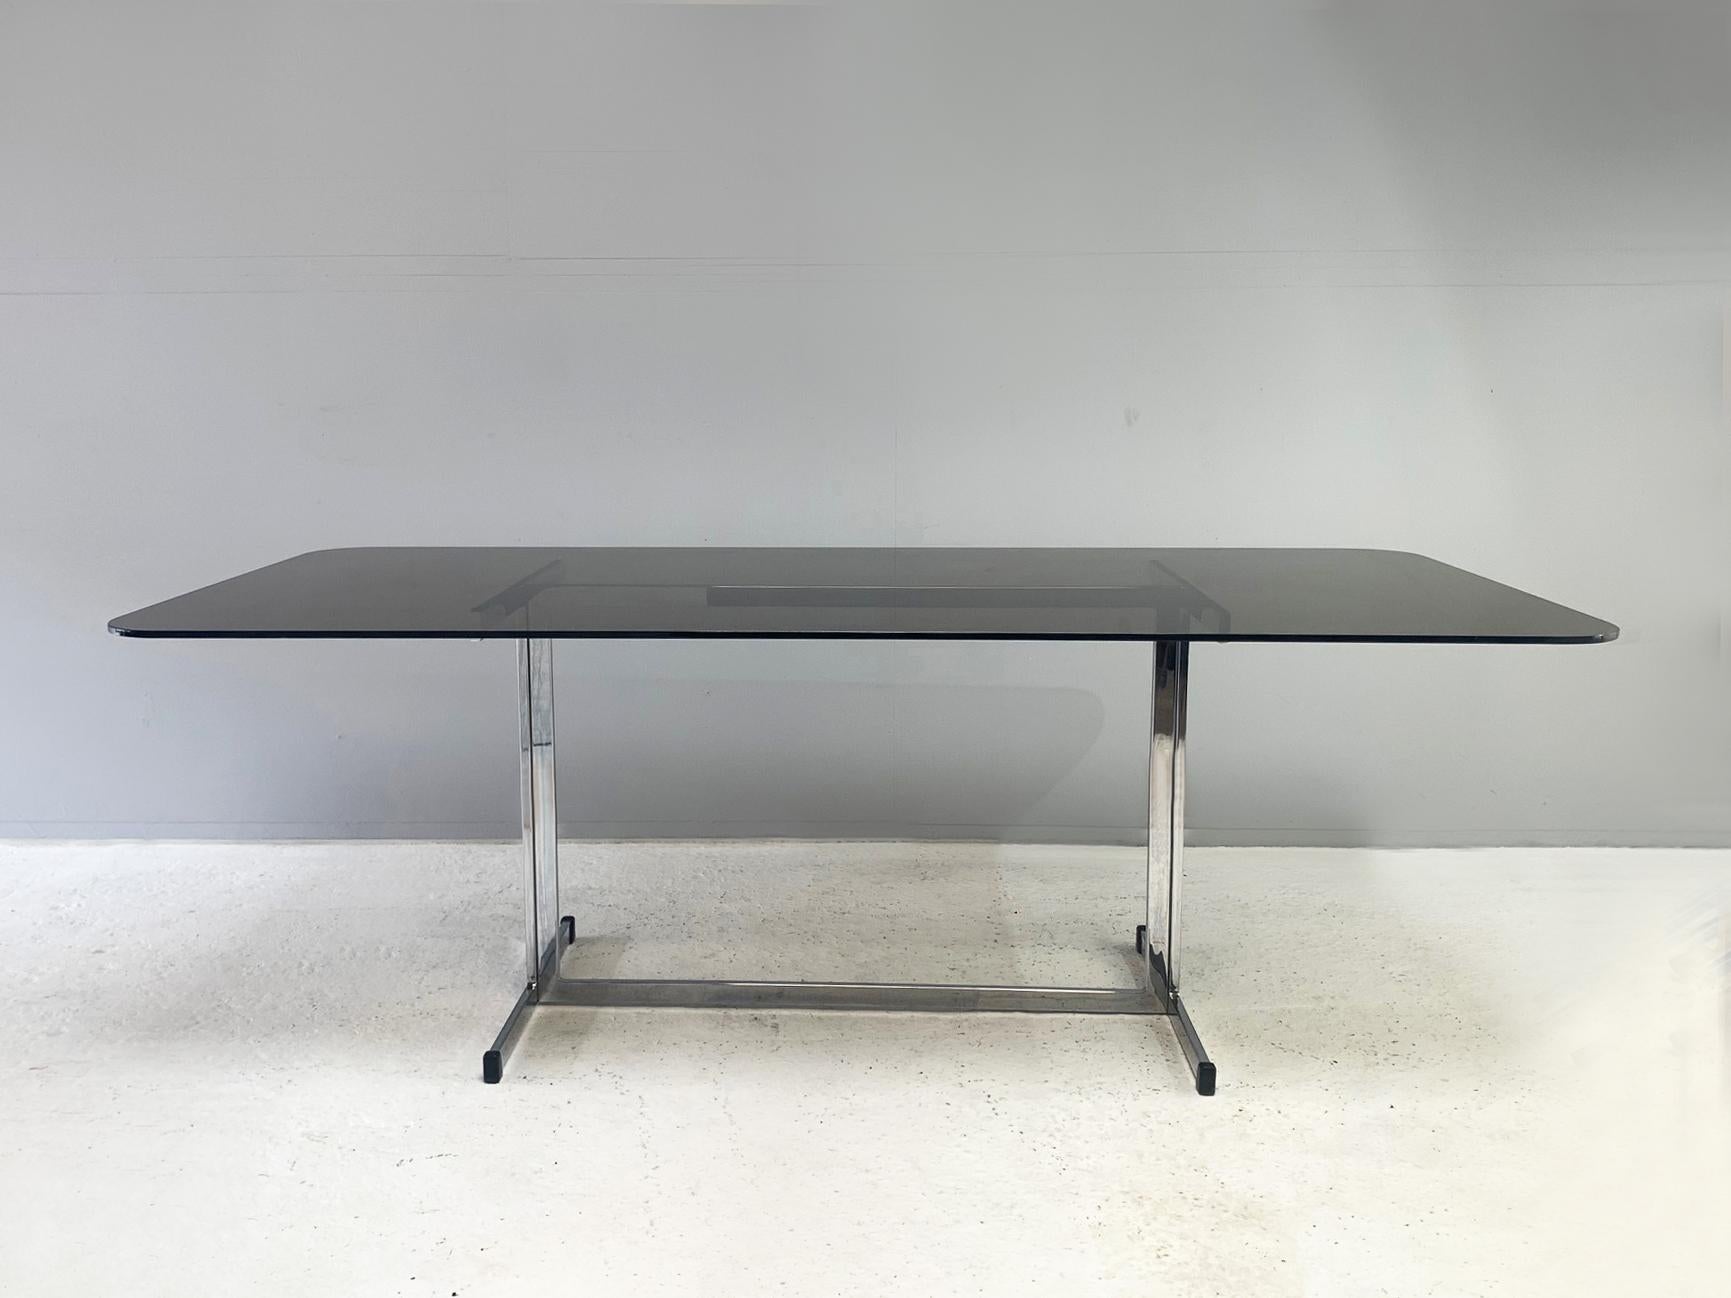 In immaculate condition, this is a 1970’s Tim Bates for Pieff smoked glass and chrome dining table / desk.

Pieff sounds French but is very British. Tim Bates and his family designed and manufactured cutting edge, sleek and minimal pieces from the